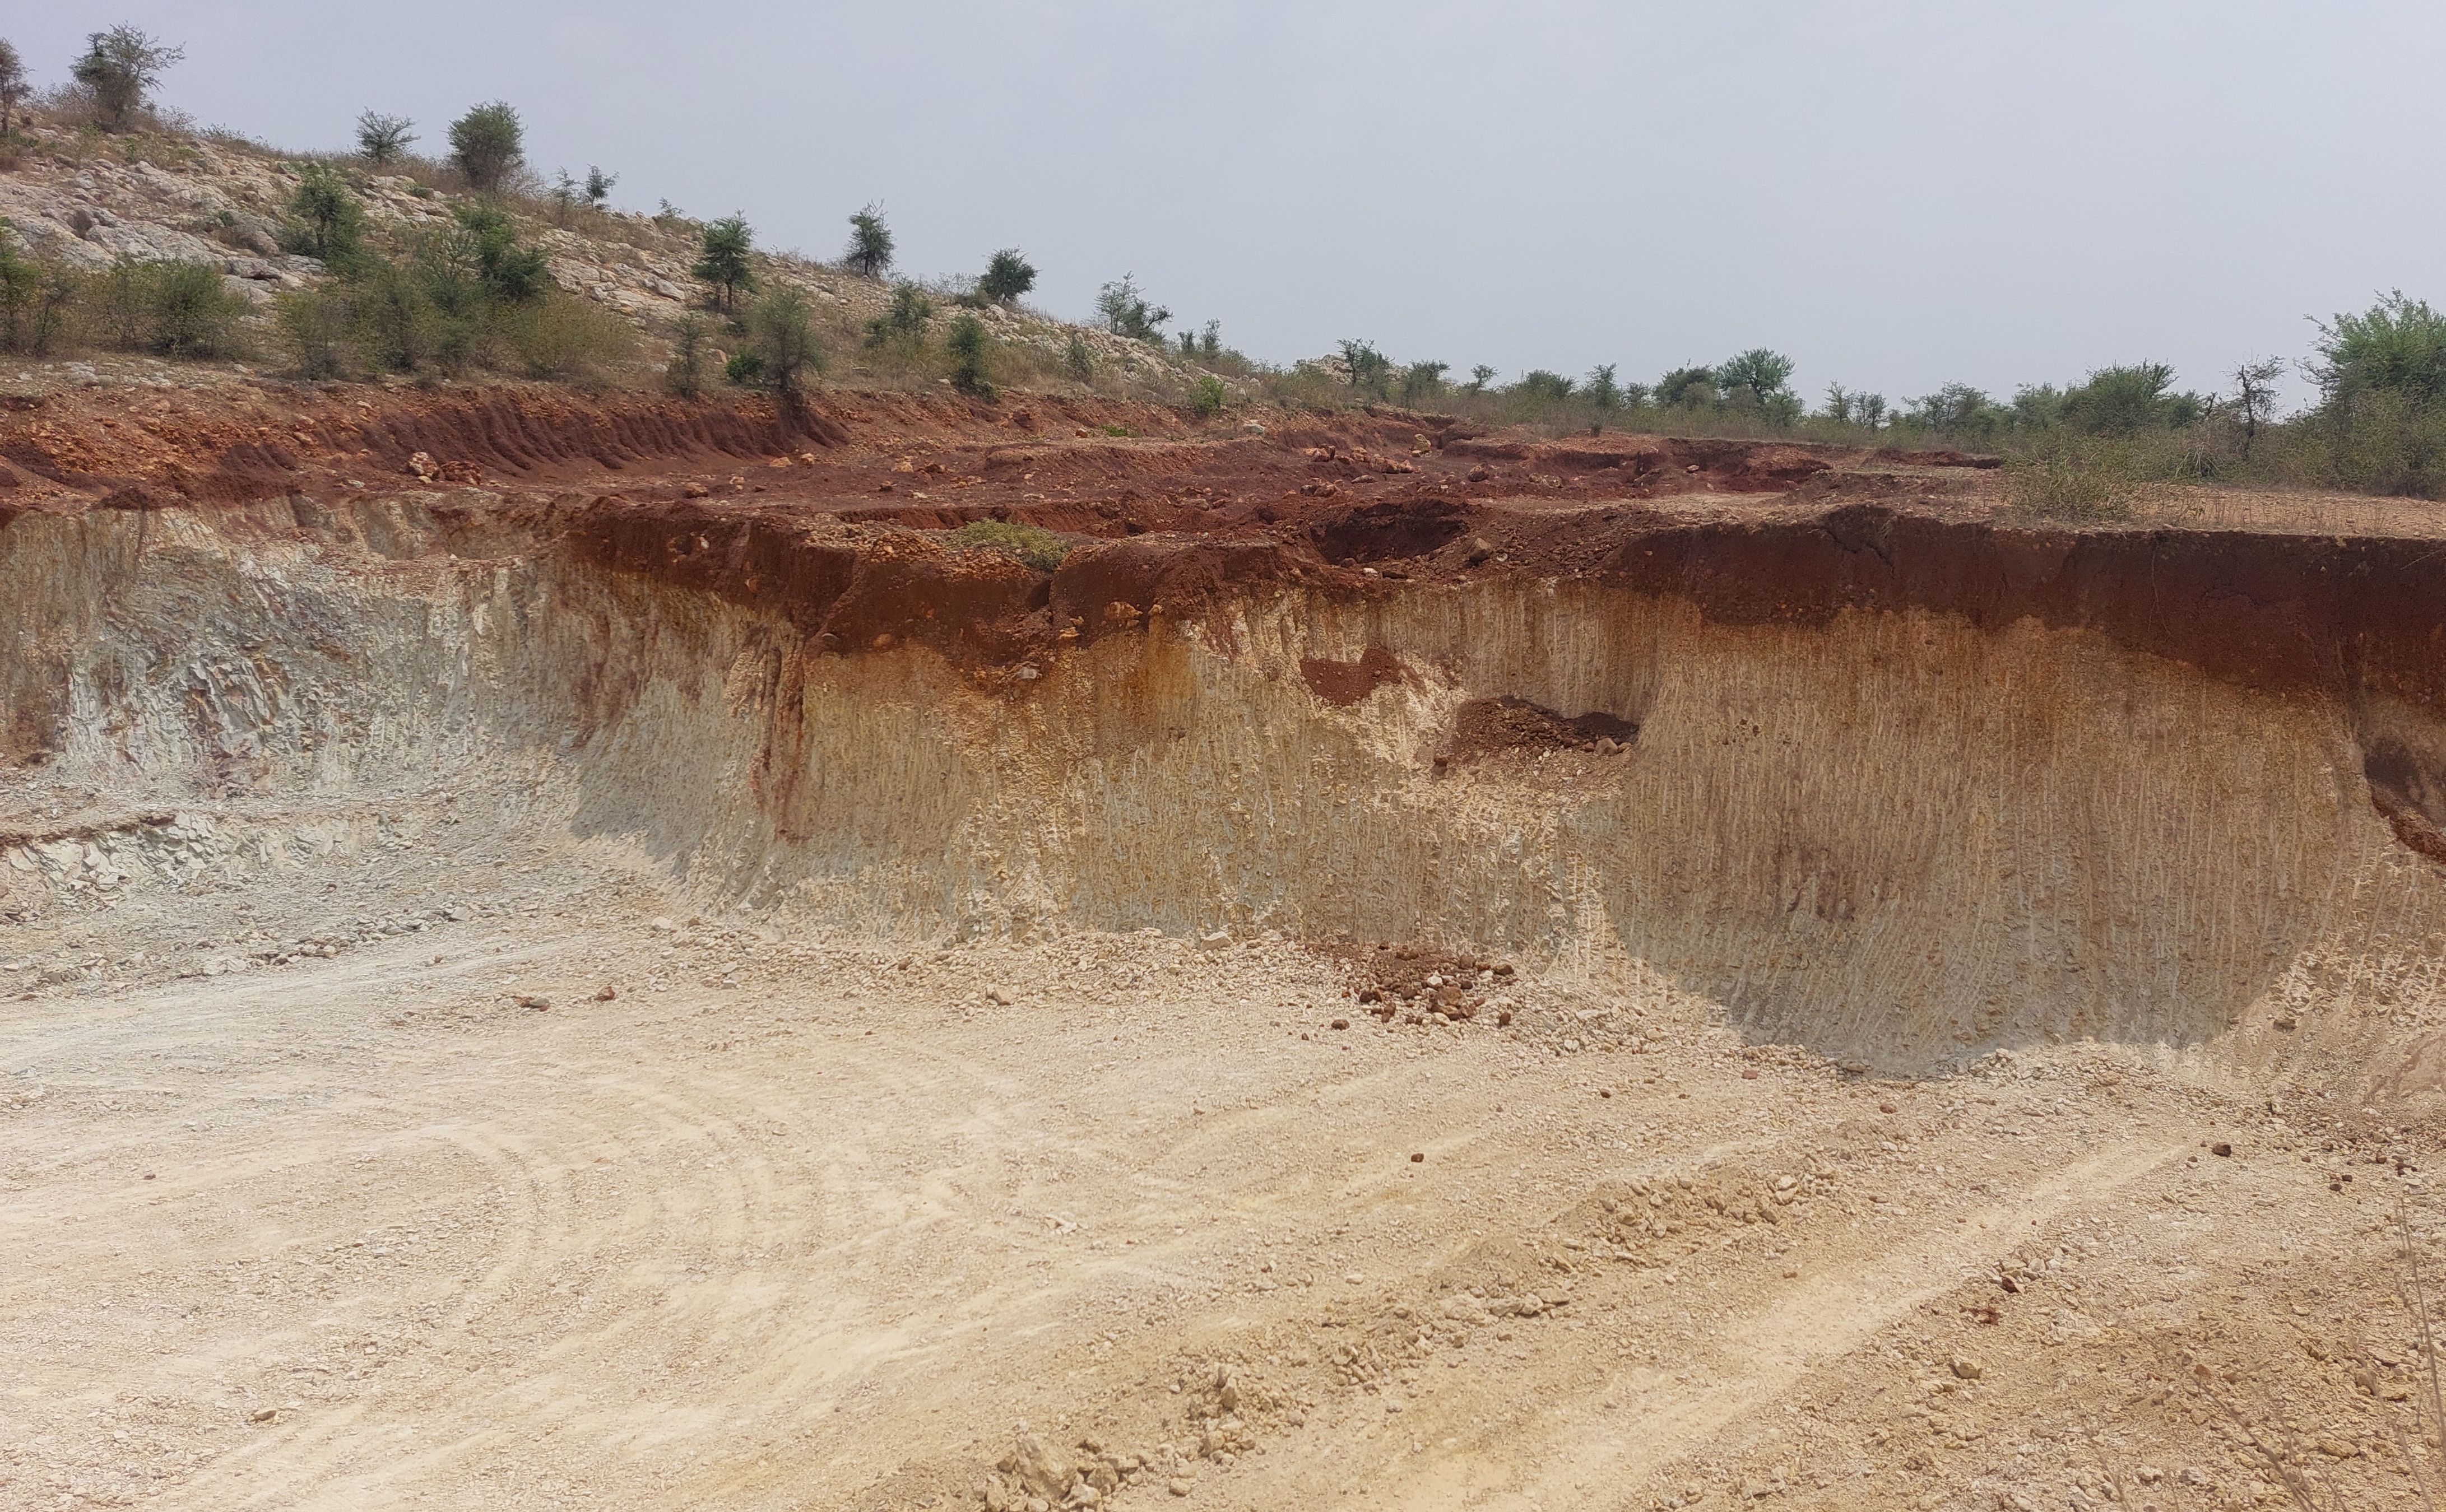 The hill was also sieved, fear of illegal miners in the village